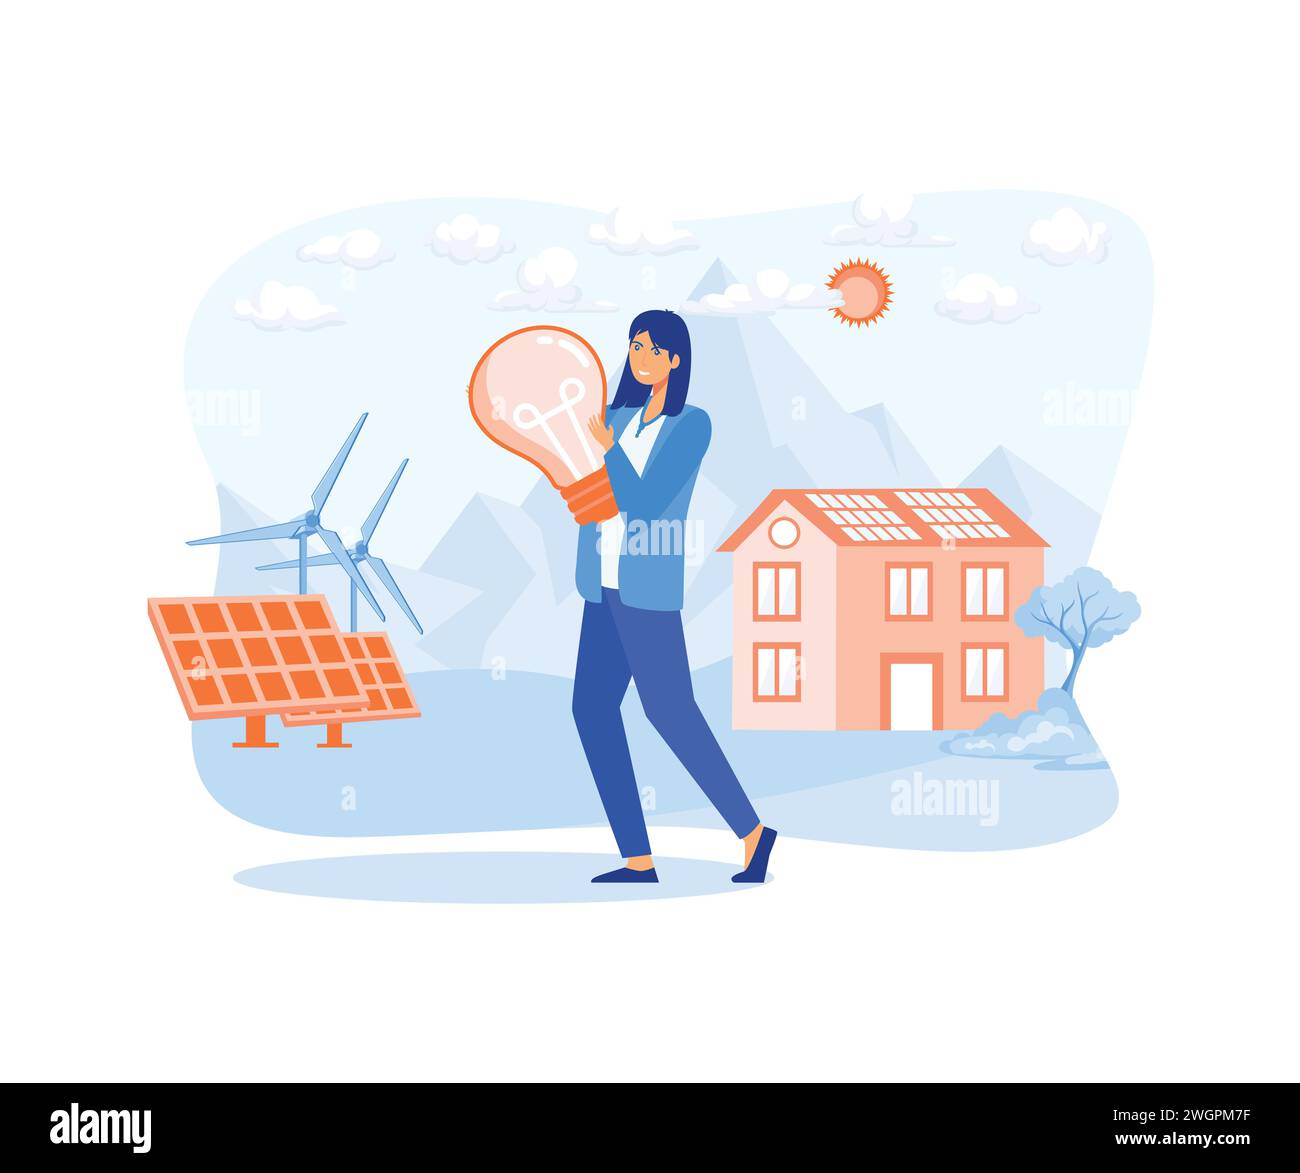 Circular economy concept. Sustainable economic growth with renewable energy and natural resources. at vector modern illustration Stock Vector